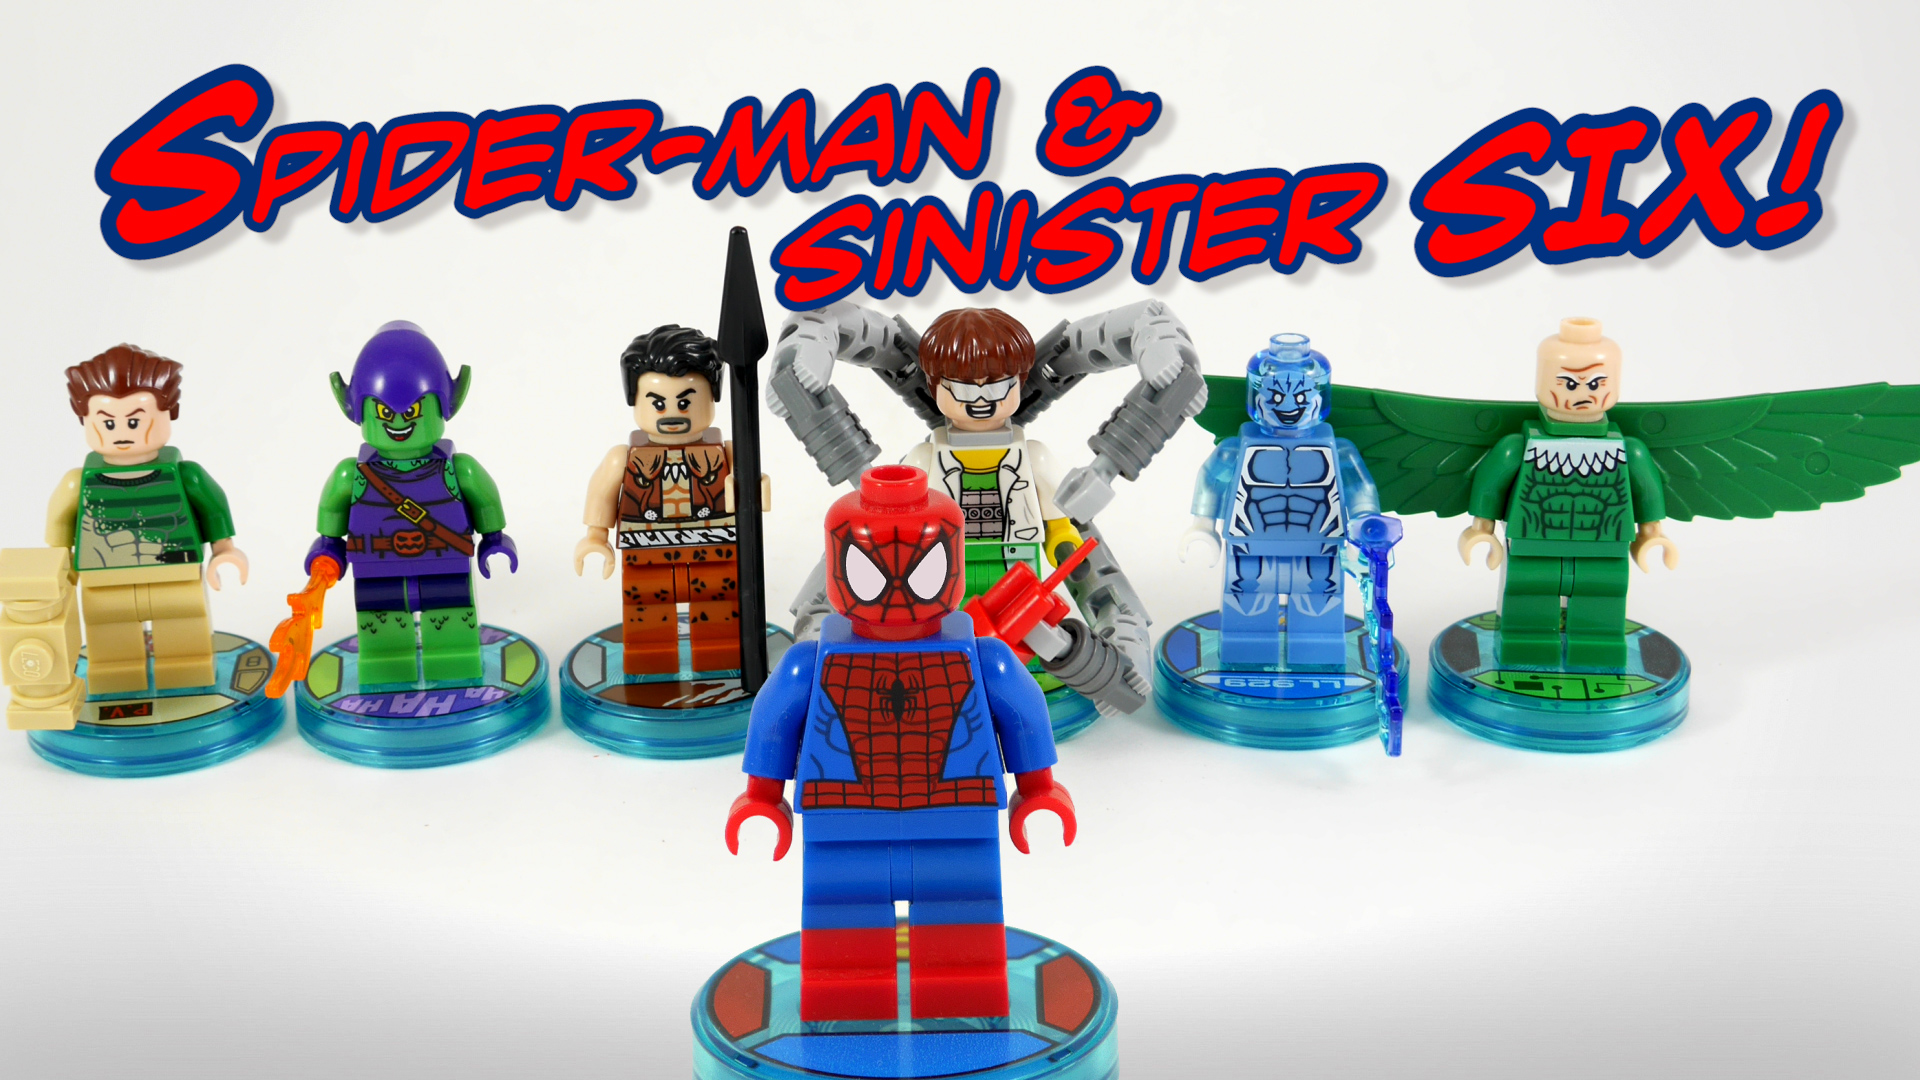 spider-man_sinister_six_join_lego_dimensions_wave_8.jpg